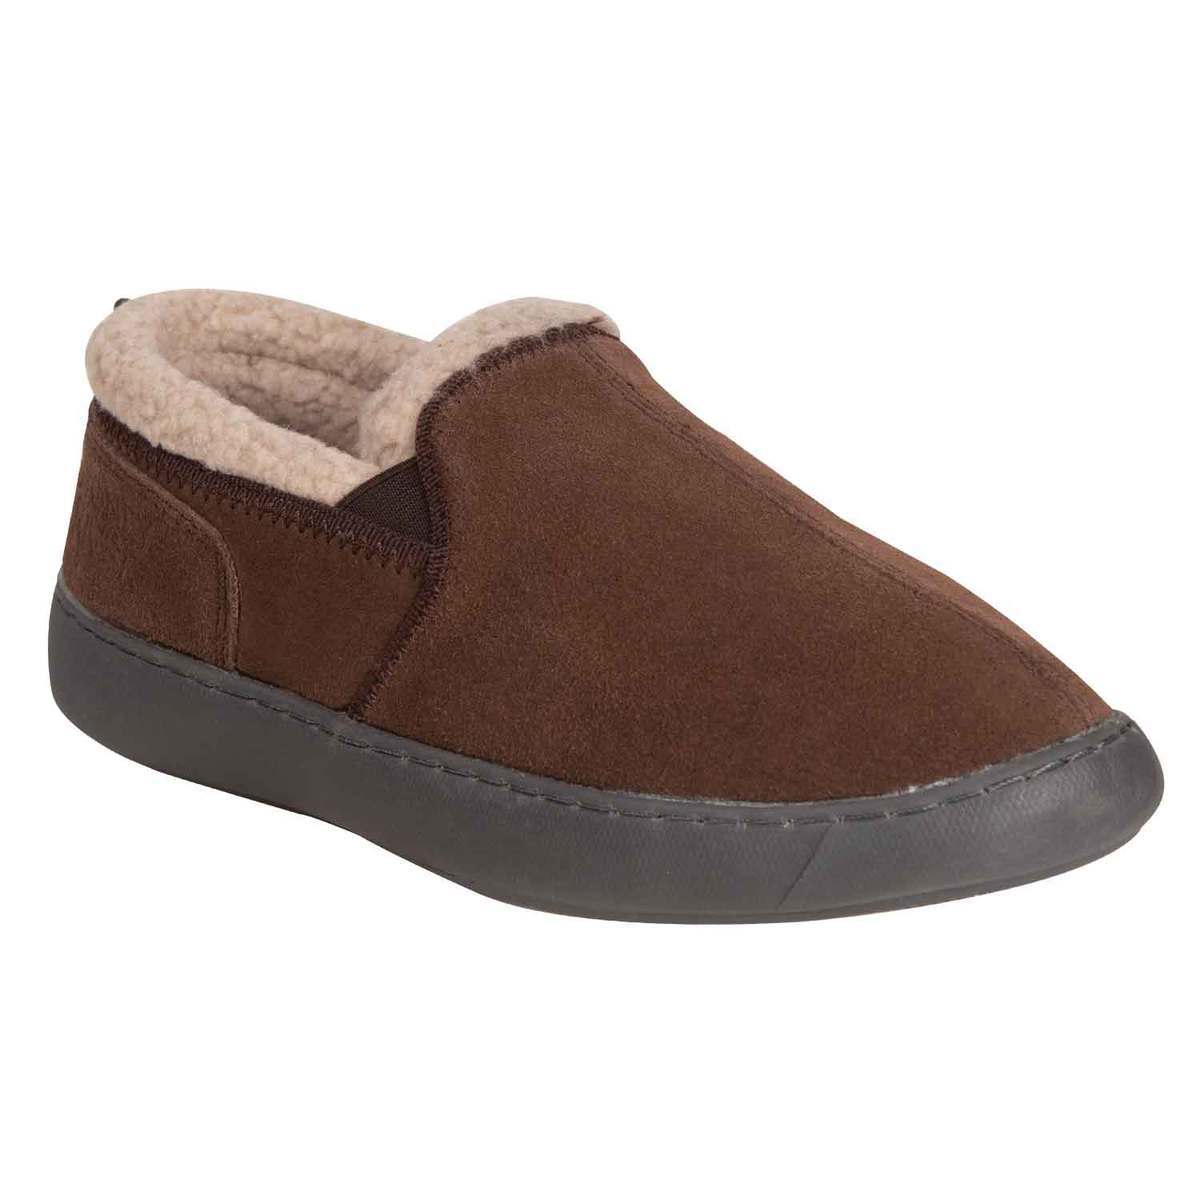 Stoney River Men's Brian Slippers - Brown - Size 11 - Brown 11 ...